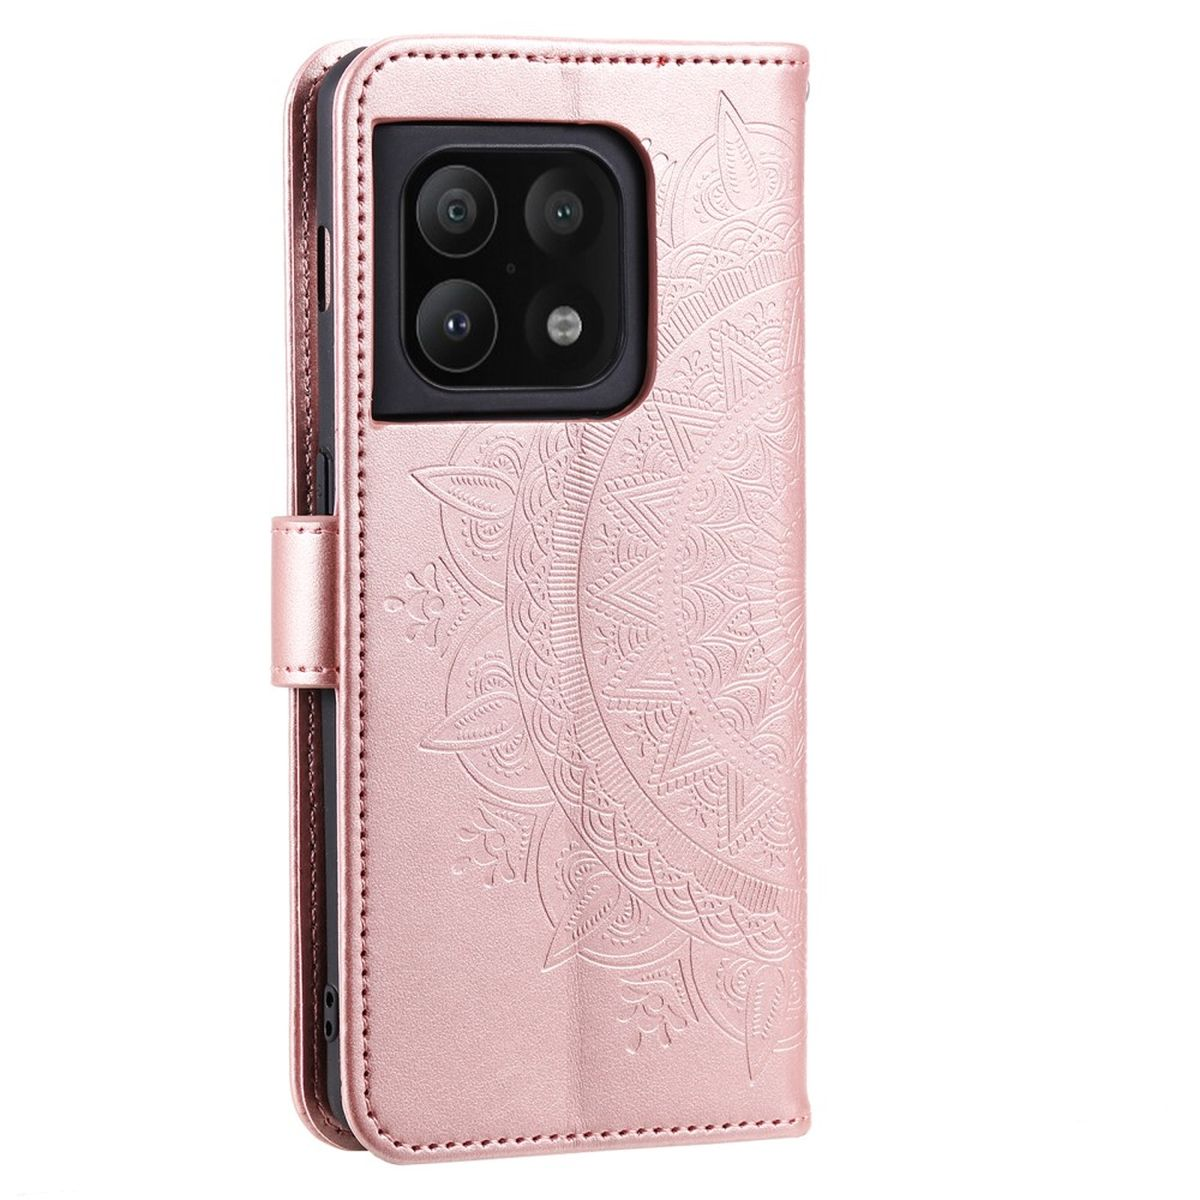 COVERKINGZ Klapphülle Bookcover, 10 Pro OnePlus, Muster, Mandala 5G, mit Rosegold